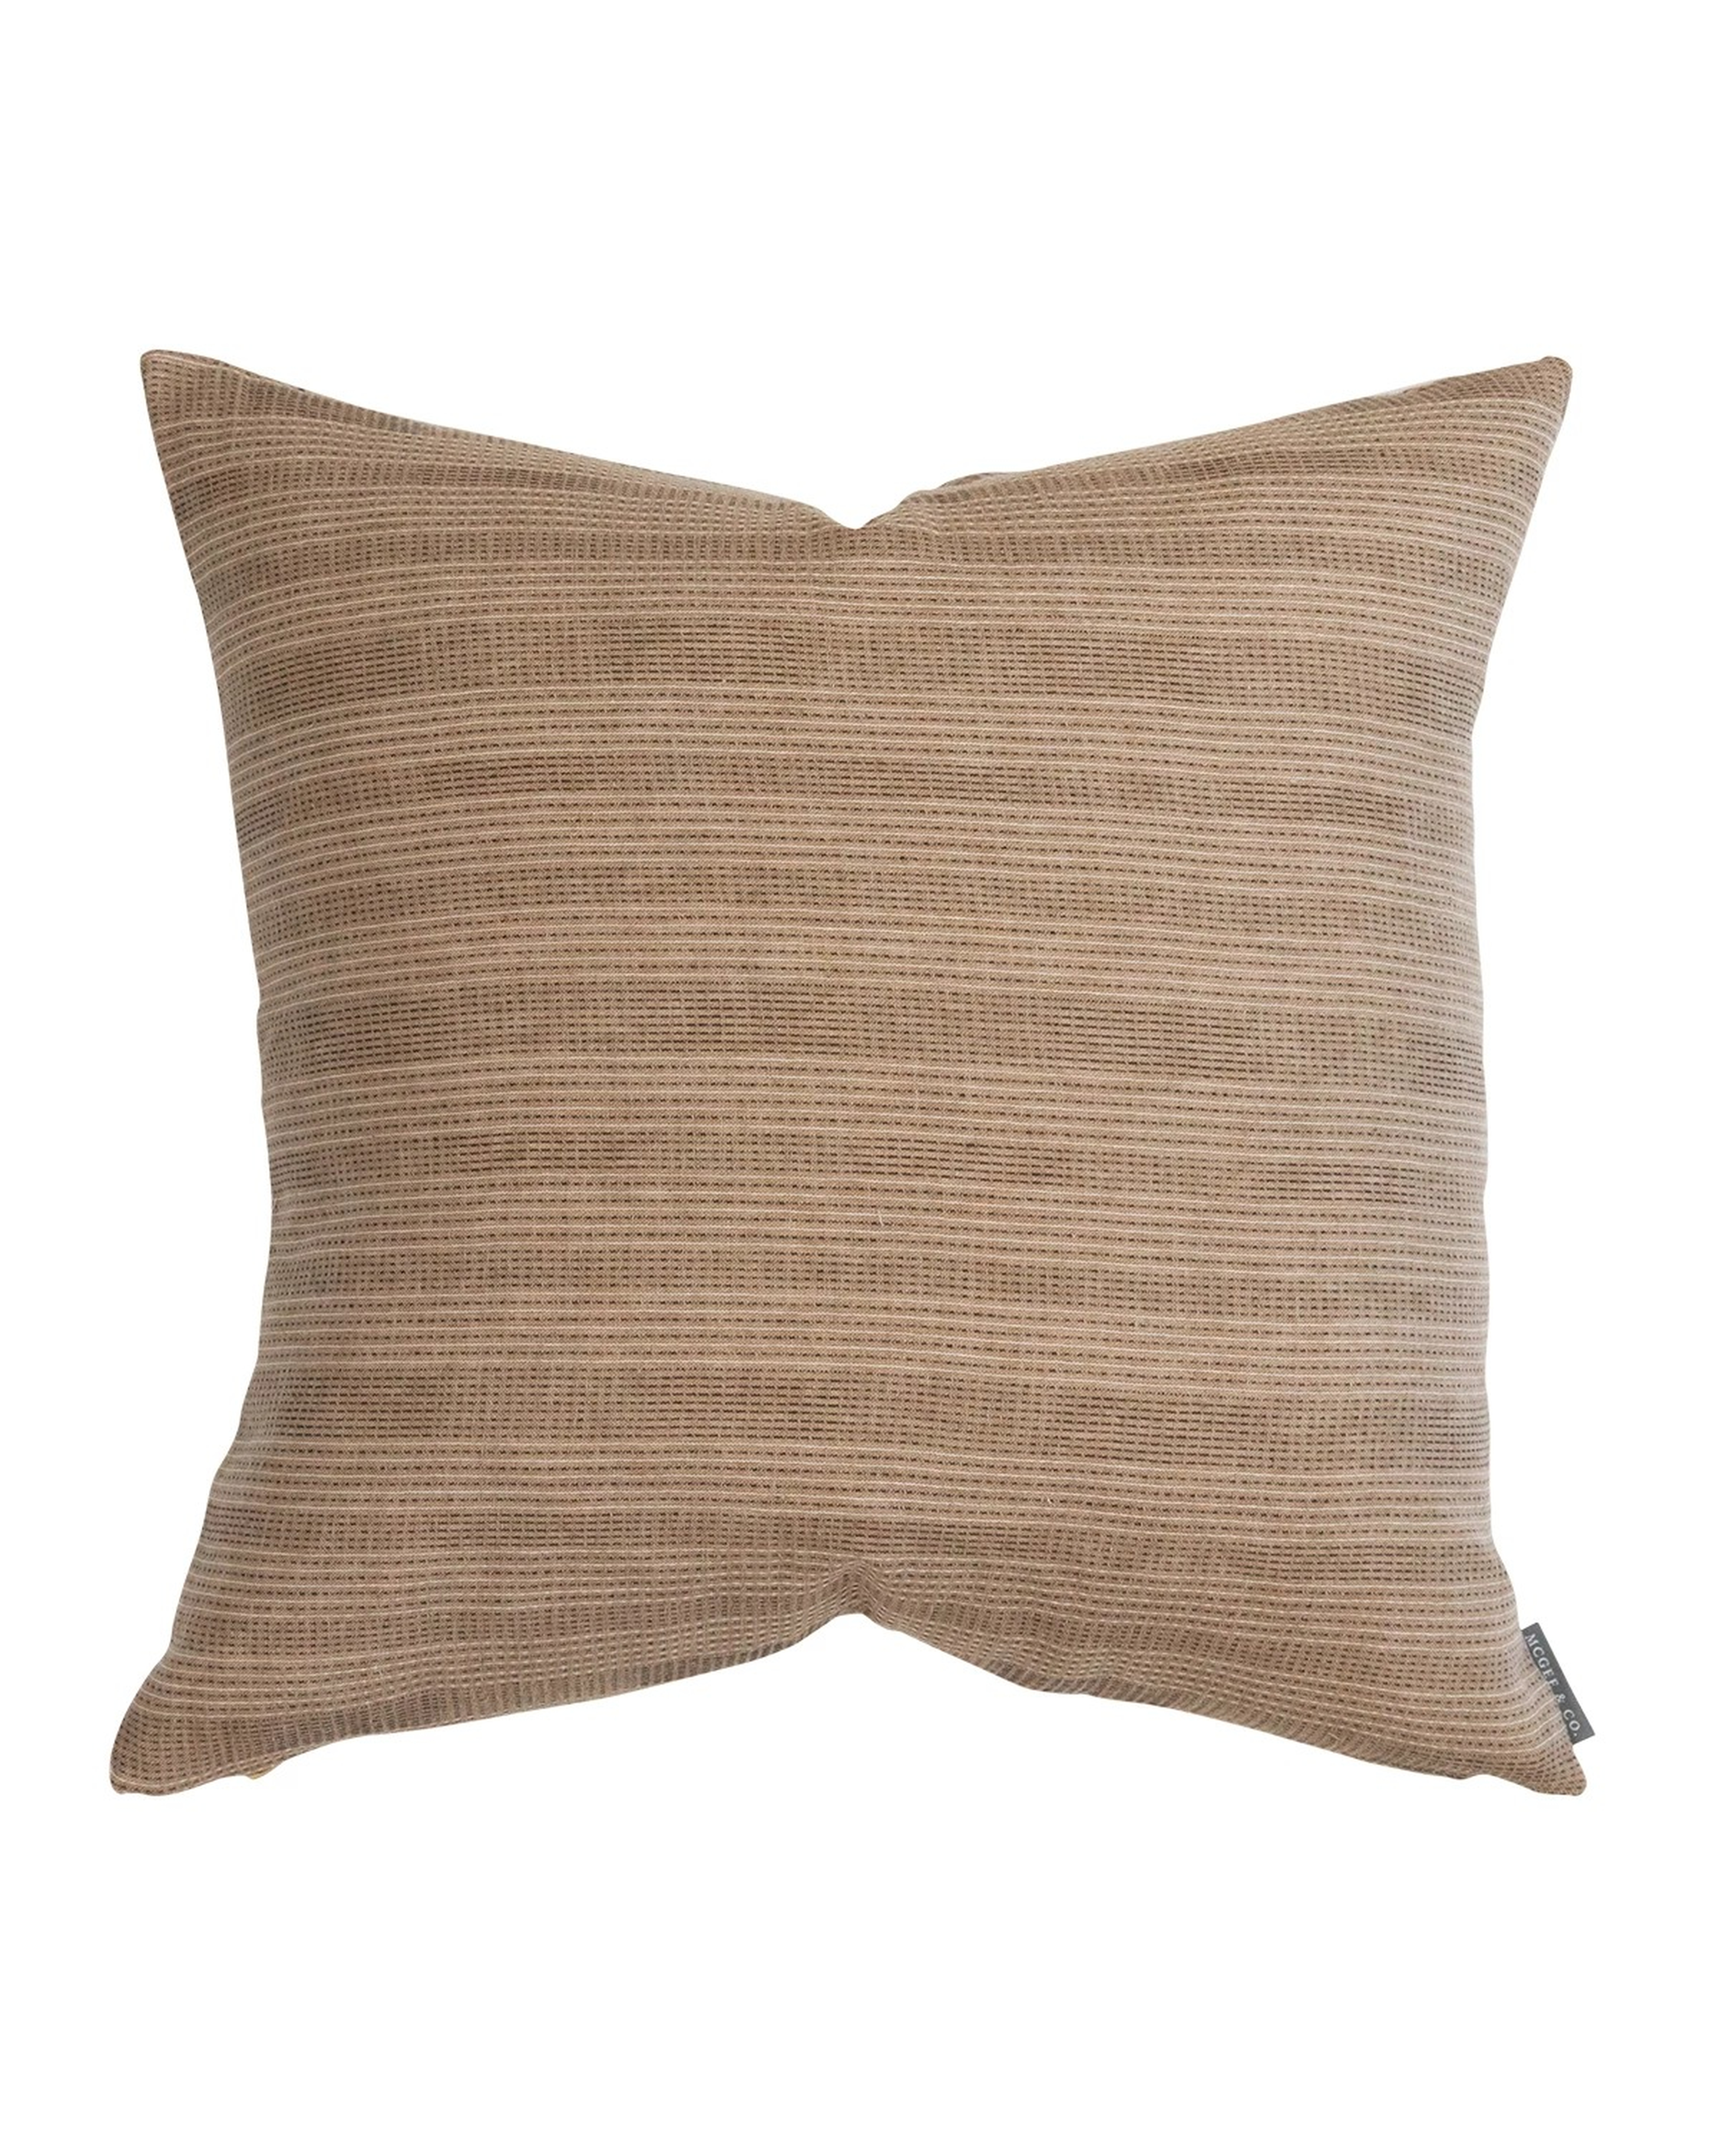 CASSIA VINTAGE NO. 3 PILLOW WITHOUT INSERT - 20" x 20" - McGee & Co.